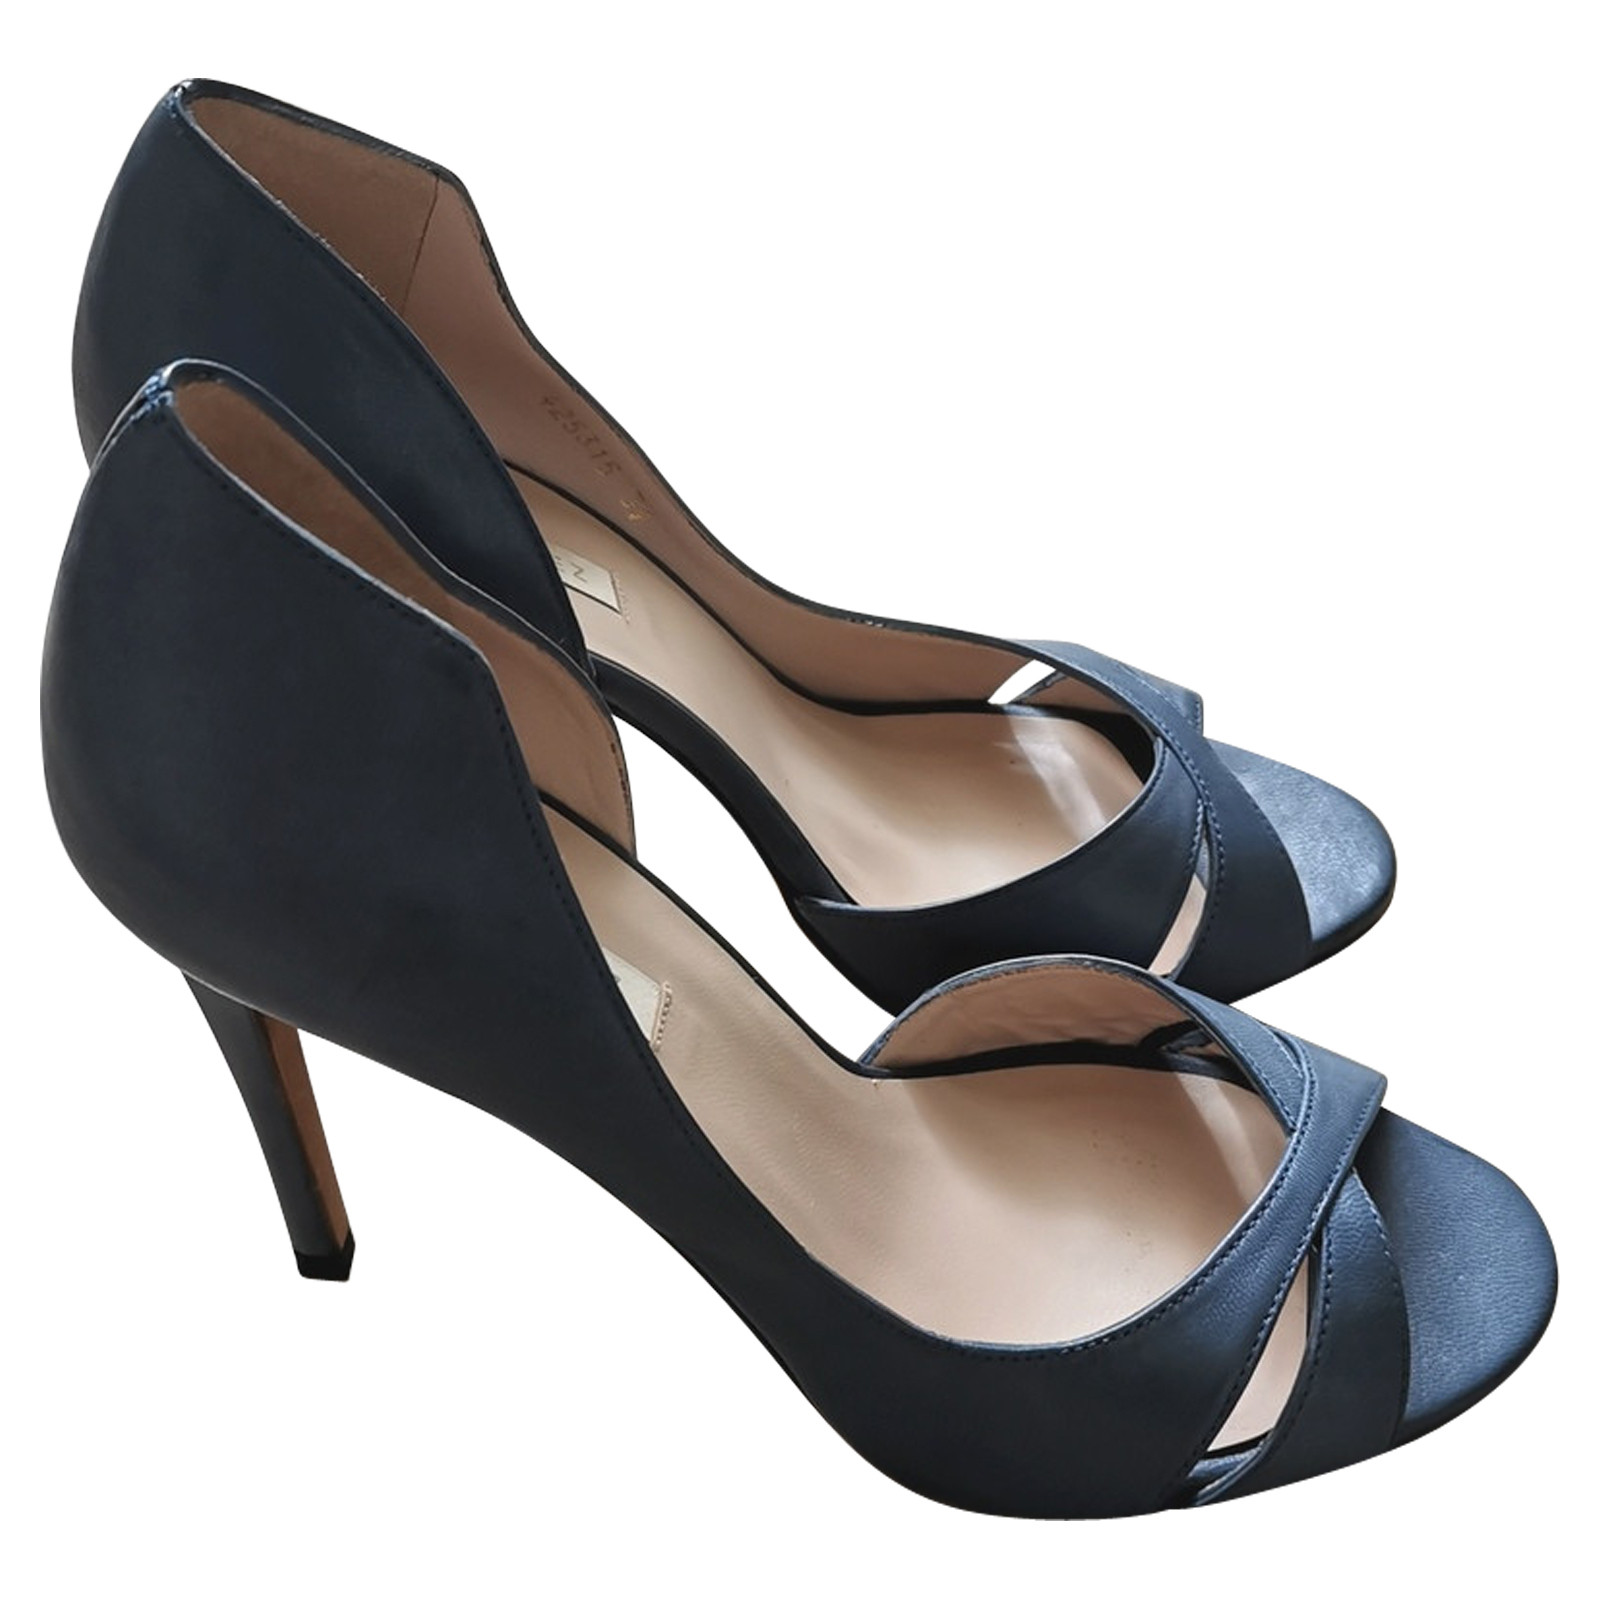 Pura Lopez Sandals Leather in Blue - Second Hand Pura Lopez Sandals Leather  in Blue buy used for 129€ (4554535)